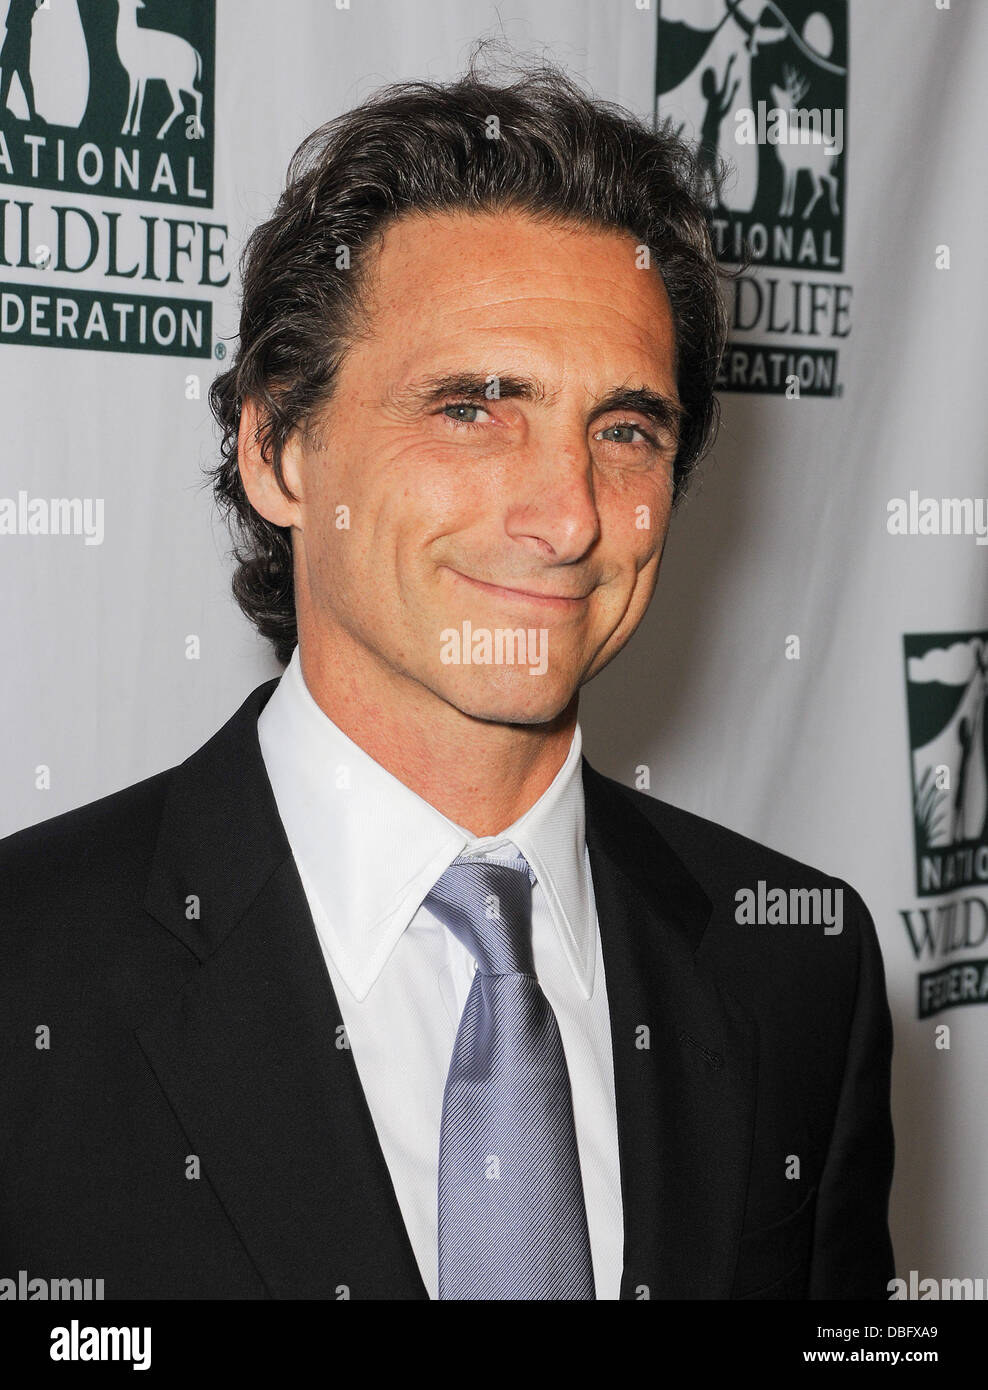 Lawrence Bender   The National Wildlife Federation Celebrates 75 Years with Voices For Wildlife Gala held at The Beverly Wilshire Four Seasons Hotel - Arrivals Beverly Hills, California - 15.06.11 Stock Photo